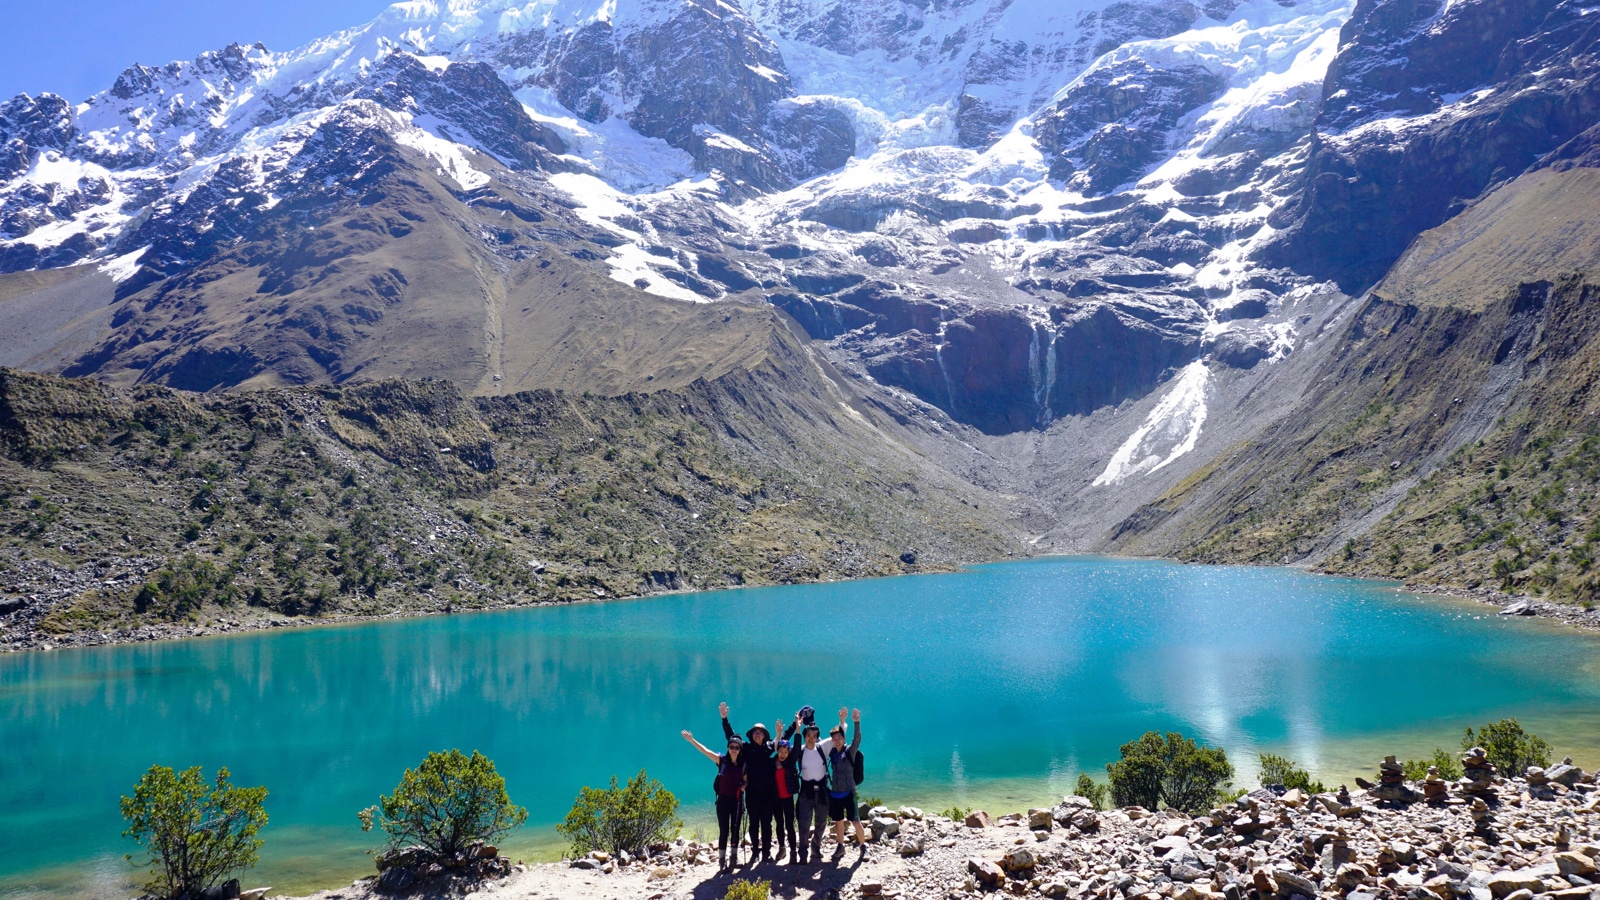 Visit one of the most visited lakes in Peru as a part of the tour